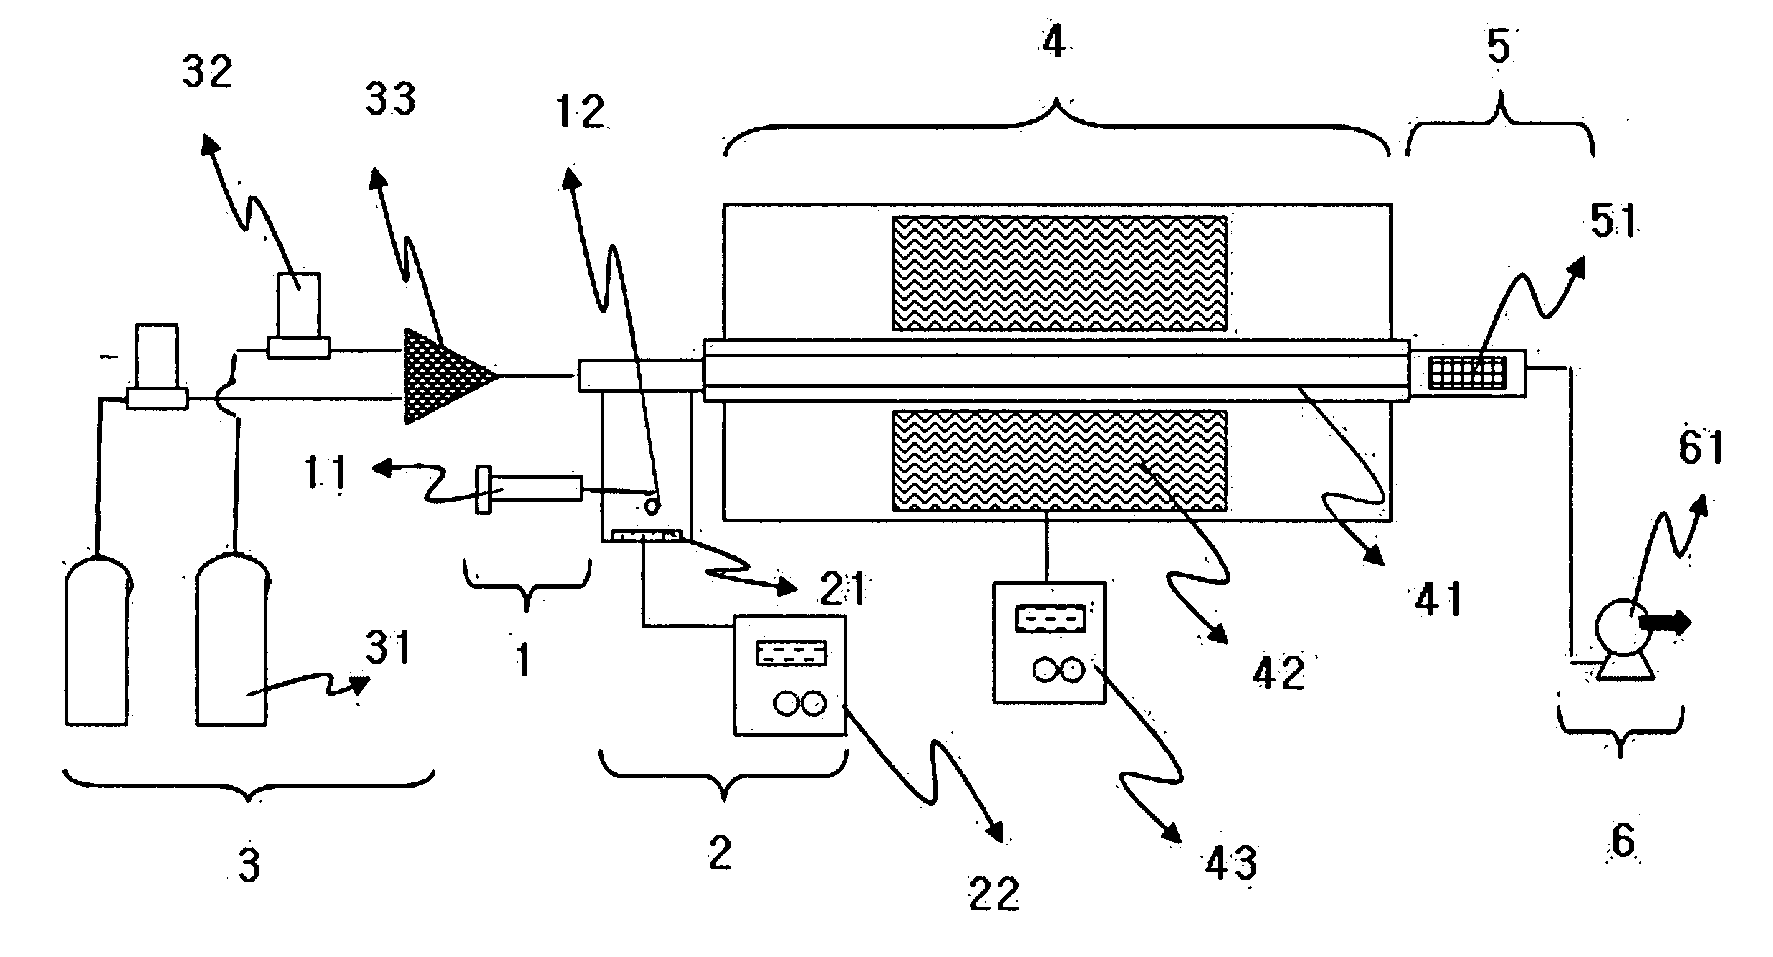 Method and apparatus for synthesizing carbon nanotubes using ultrasonic evaporation